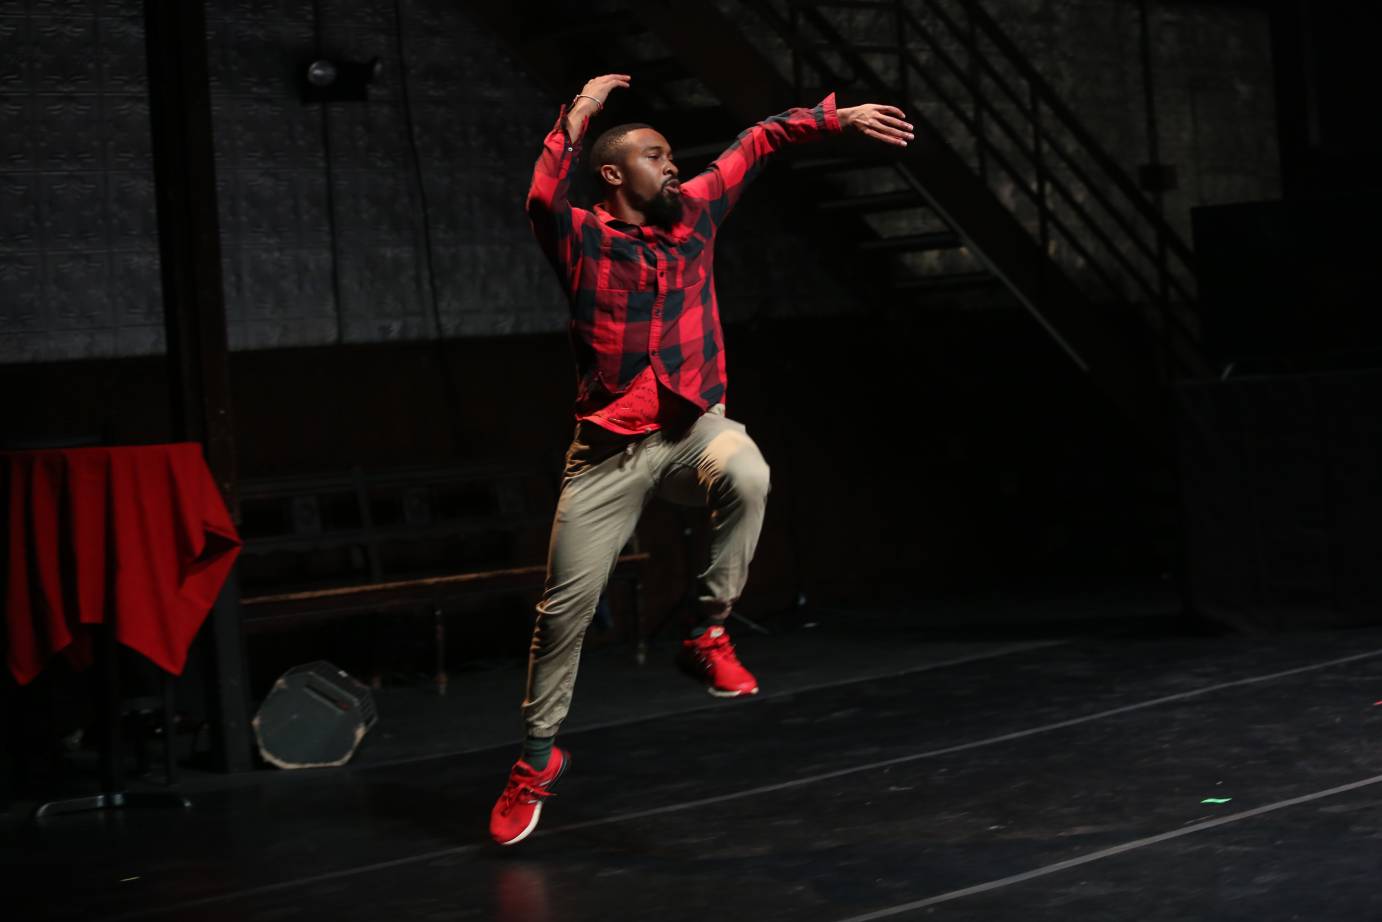 Johnie Cruise Mercer in a red and black checked lumberjack shirt, olive pants and red sneakers, jumps and reaches into the air. Behind him is a table with a red cloth and a black wooden bench